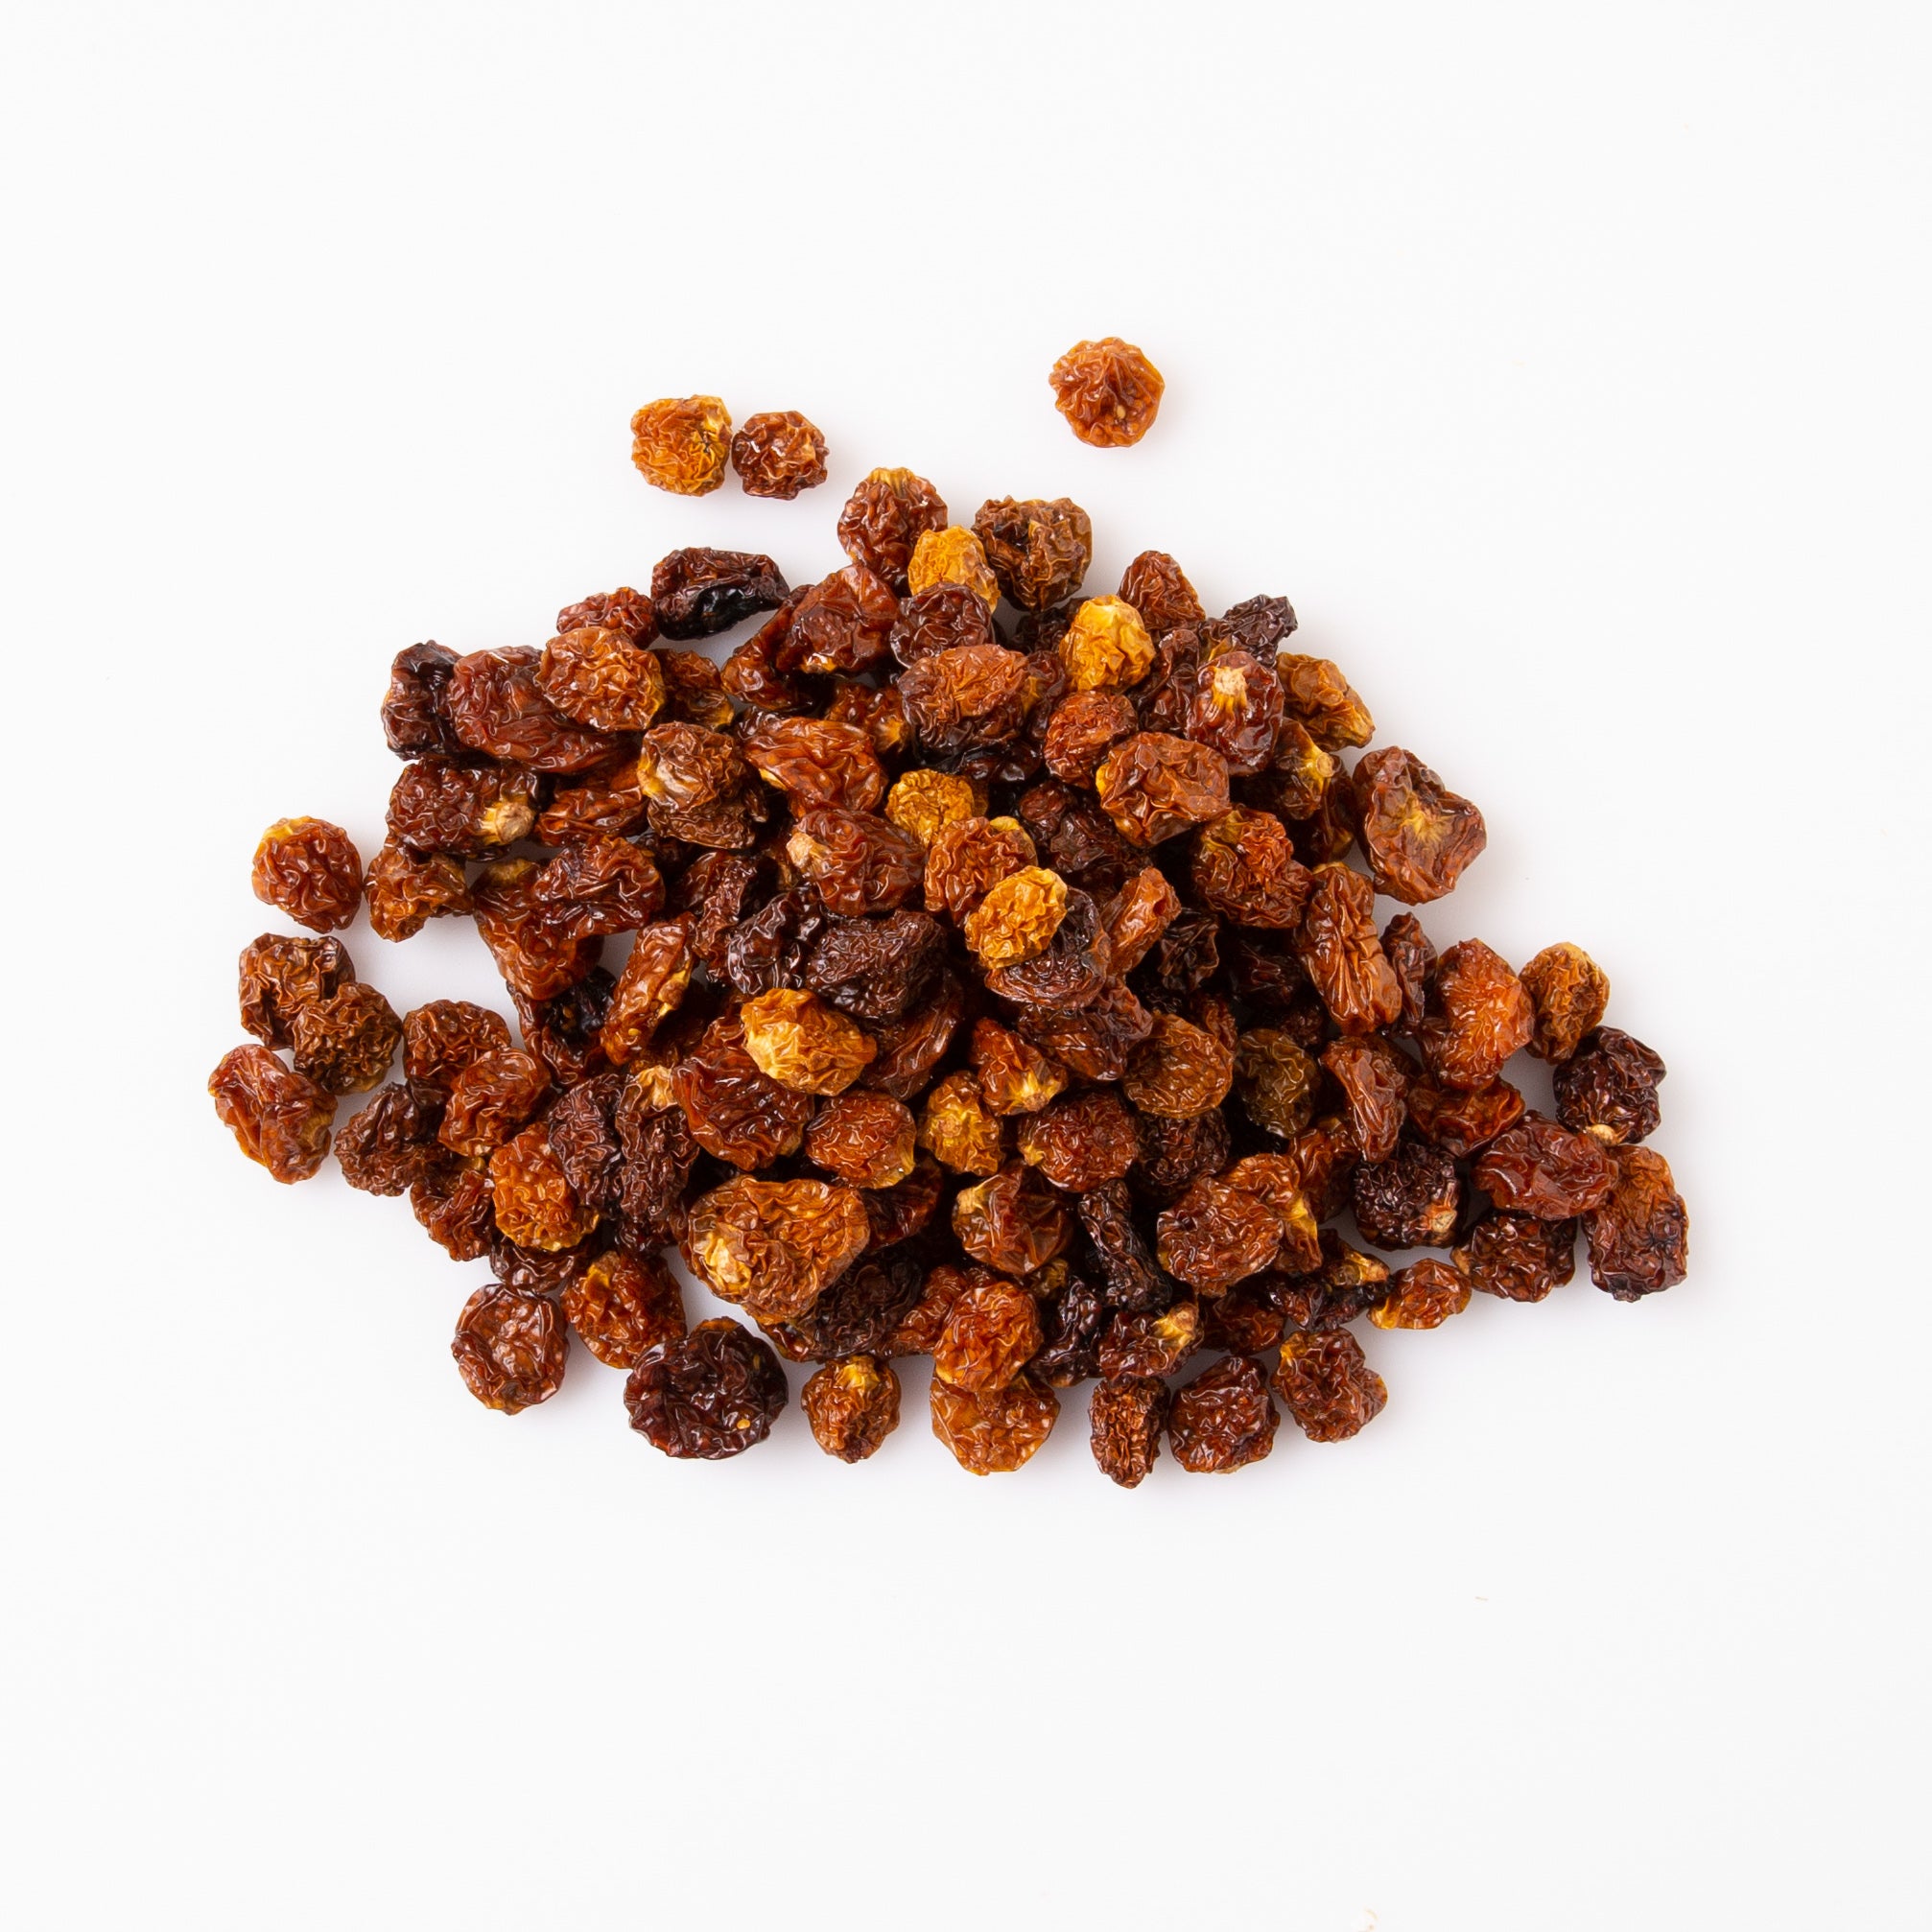 Organic Dried Inca Berries (Dried Fruits) Image 2 - Naked Foods